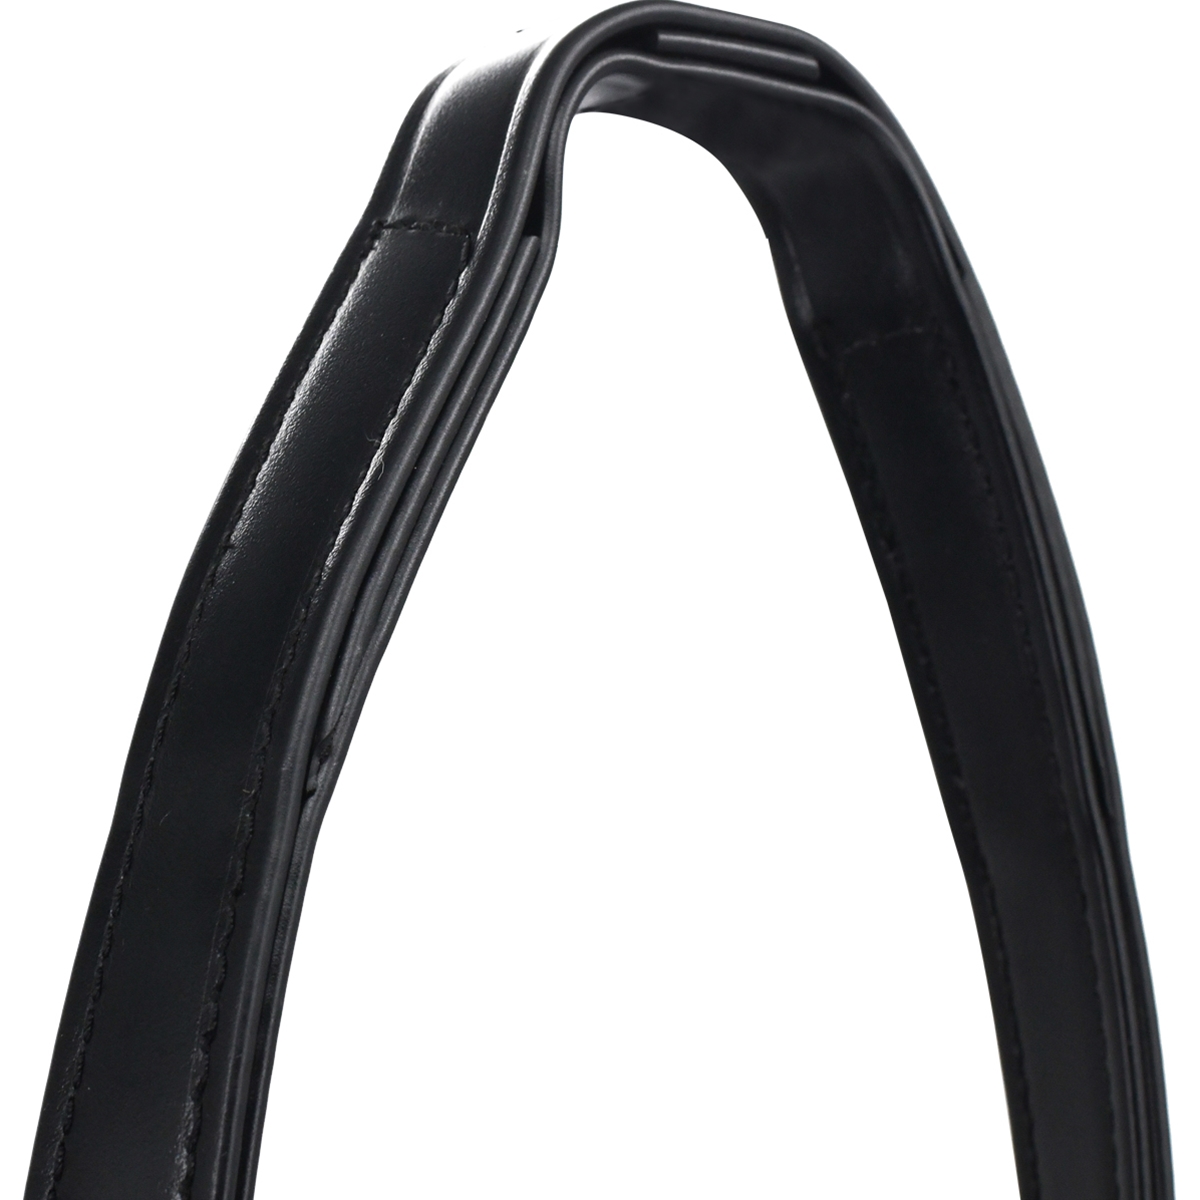 Bucking Strap for Driving Harness Made from Beta Biothane